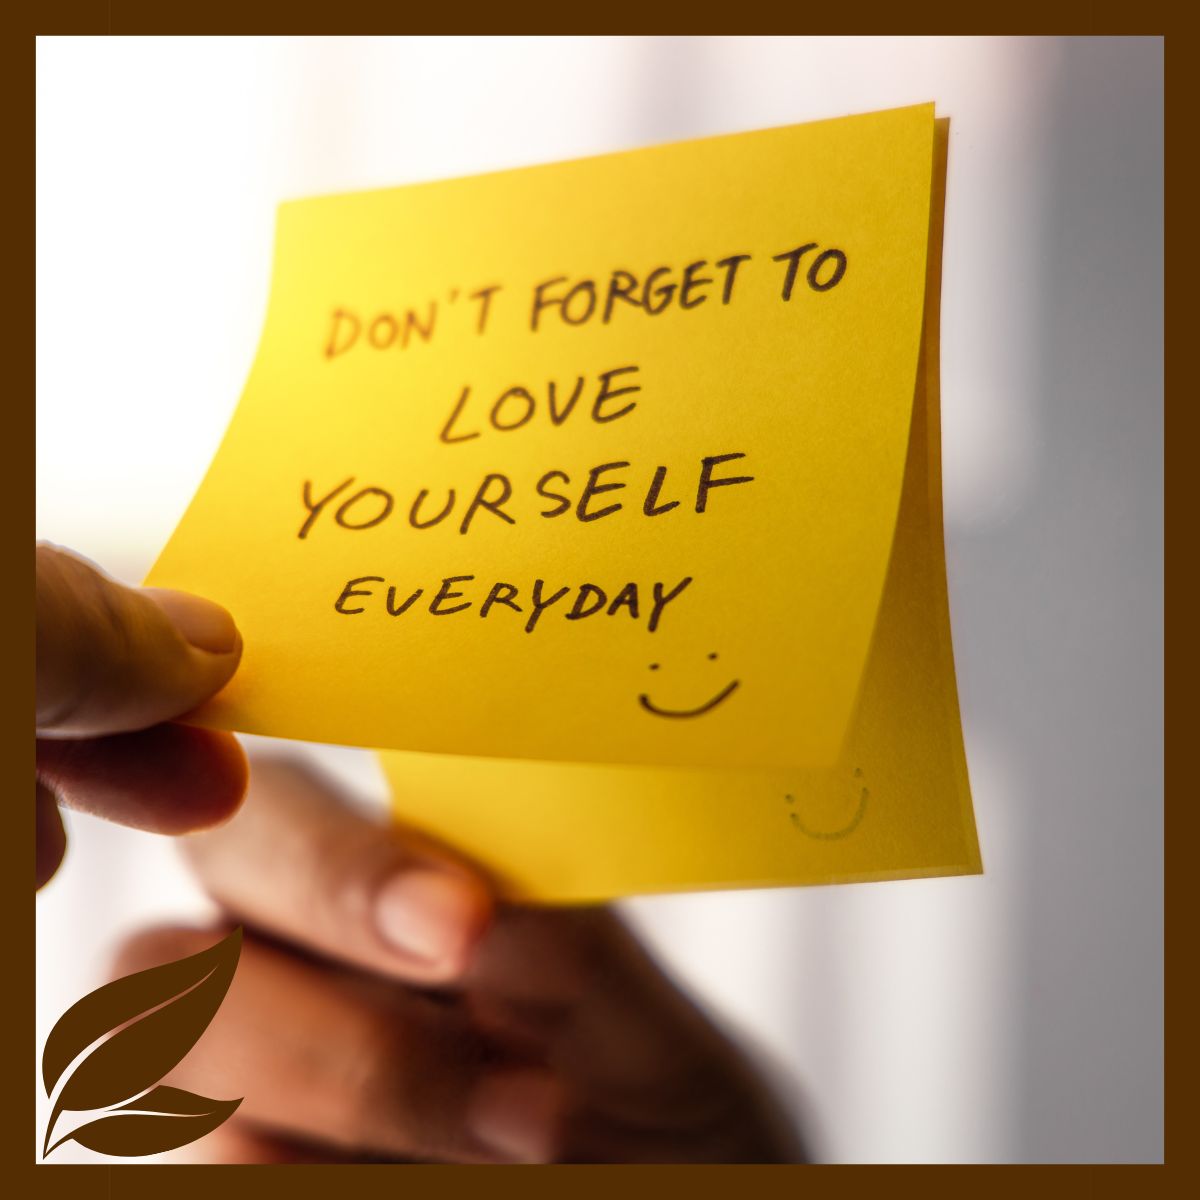 Don't forget to love yourself every day.